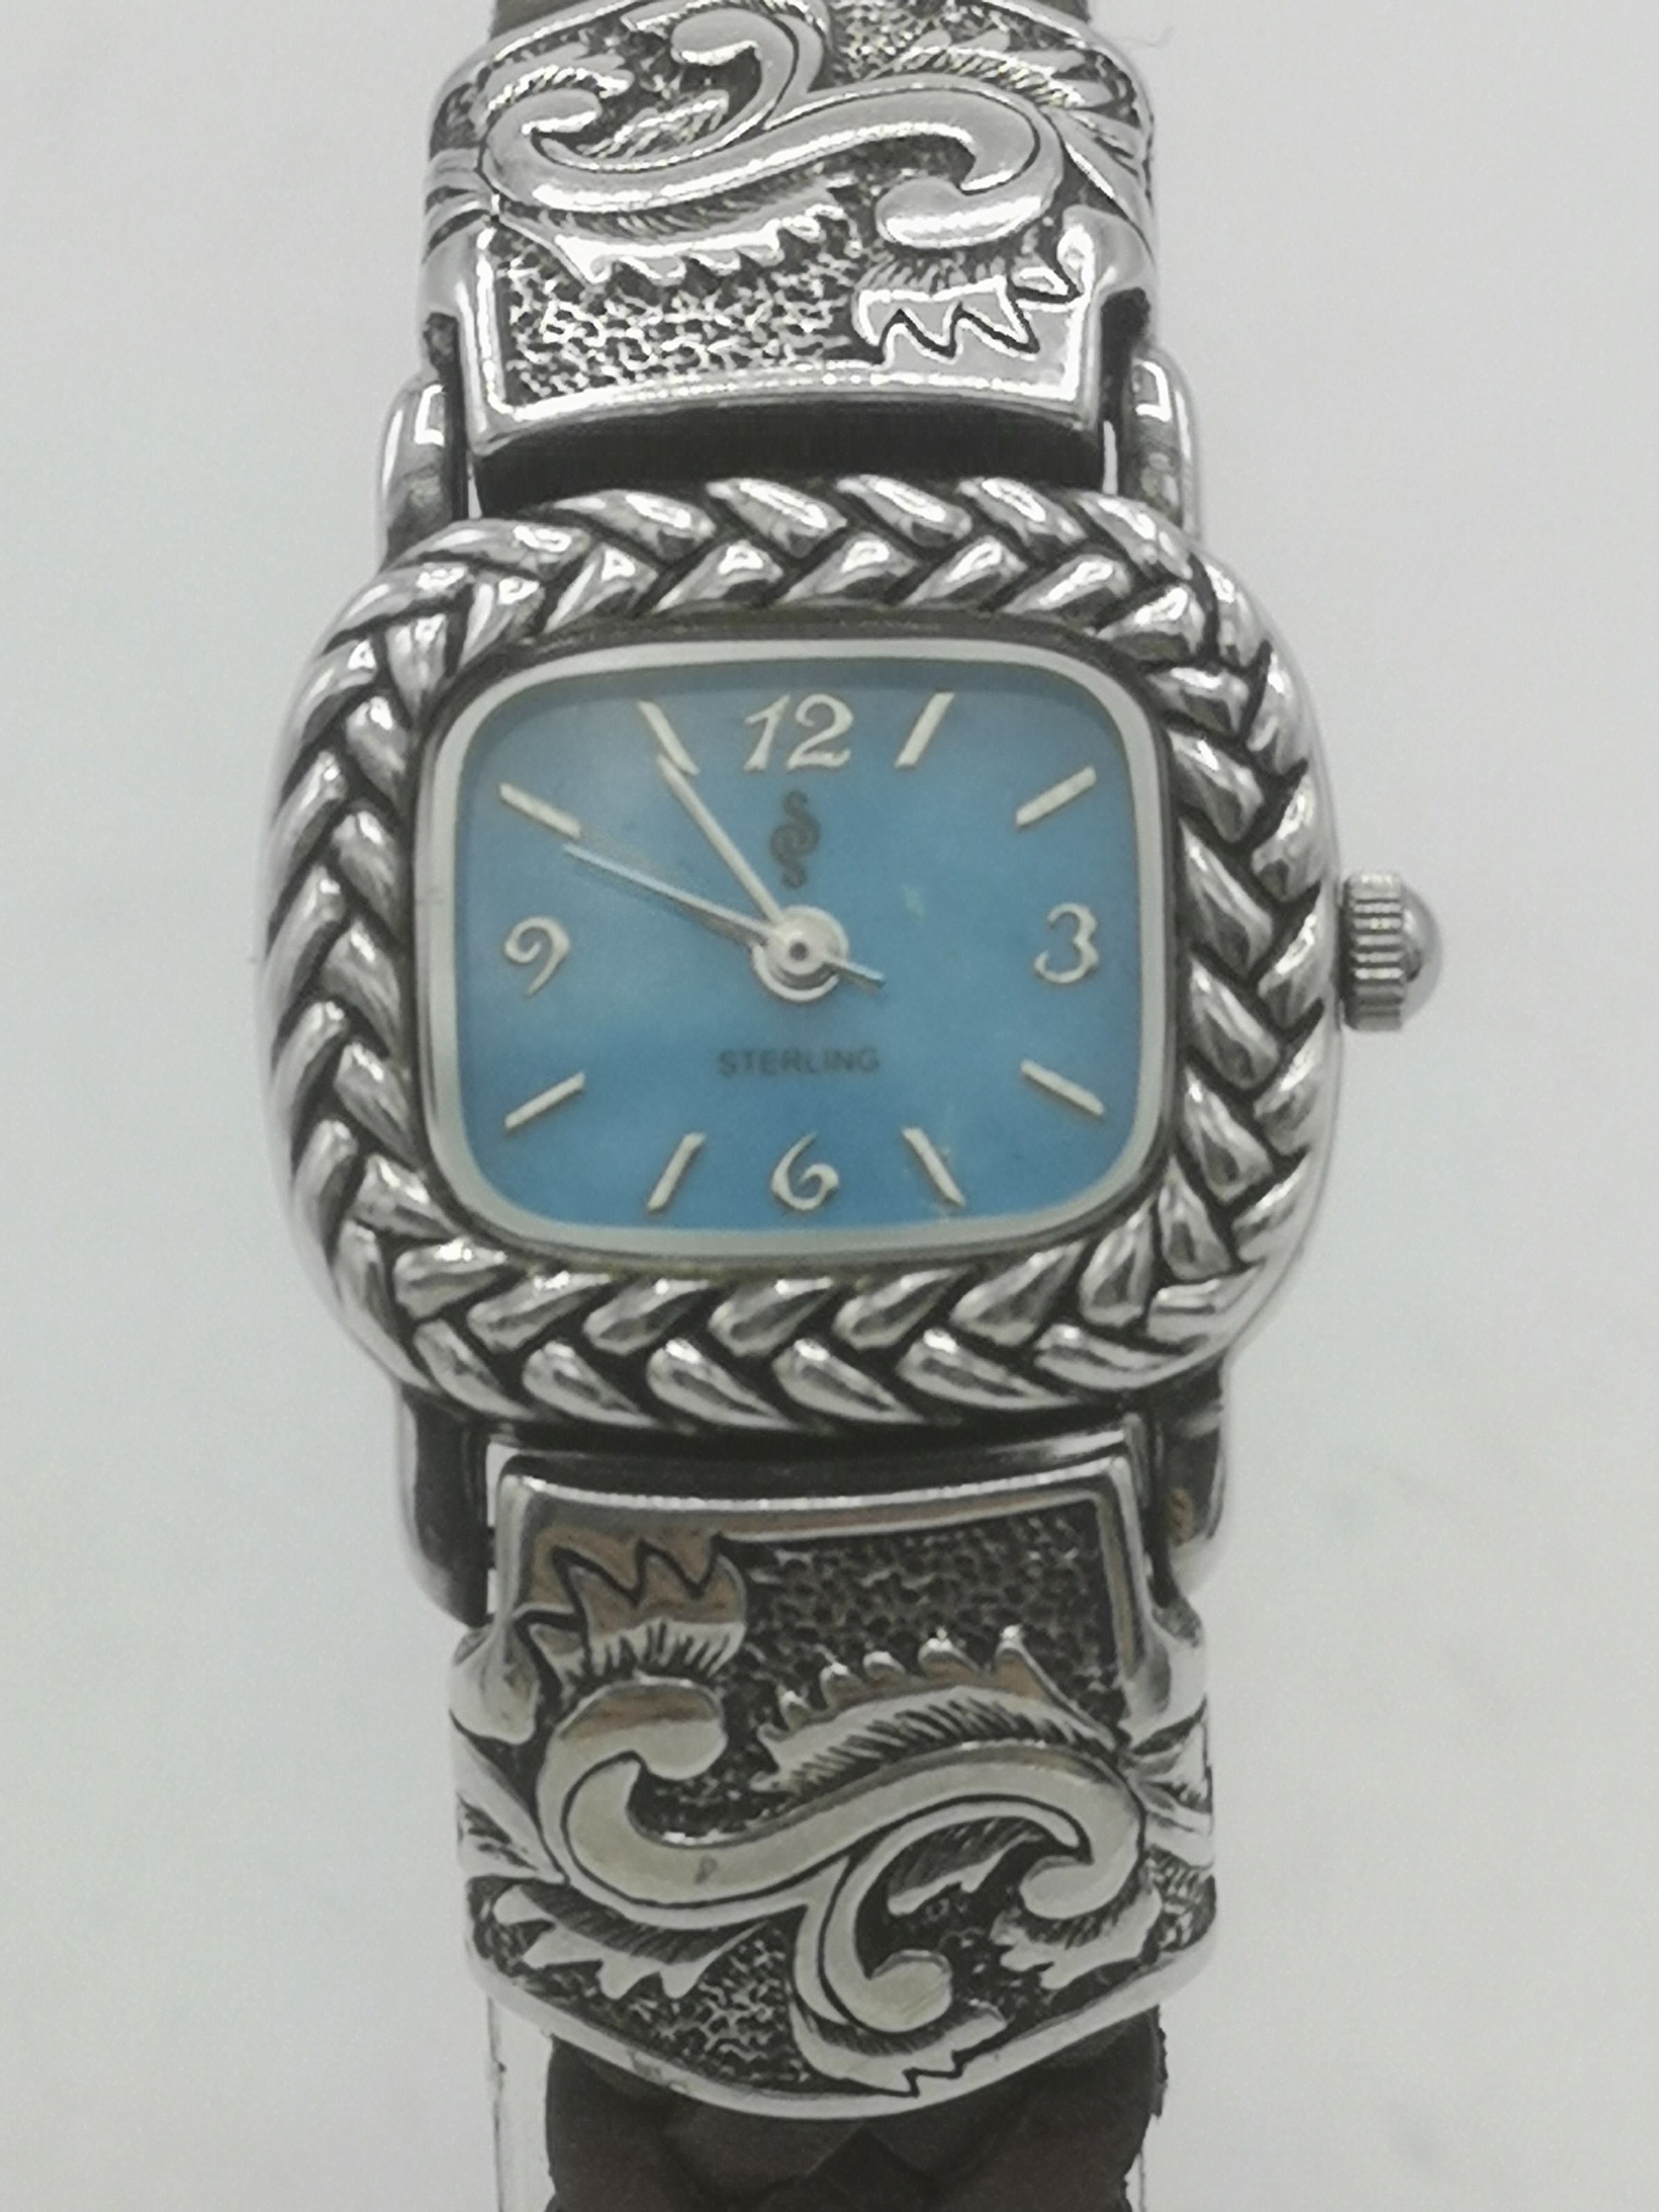 Sterling silver wrist watch - Image 2 of 7